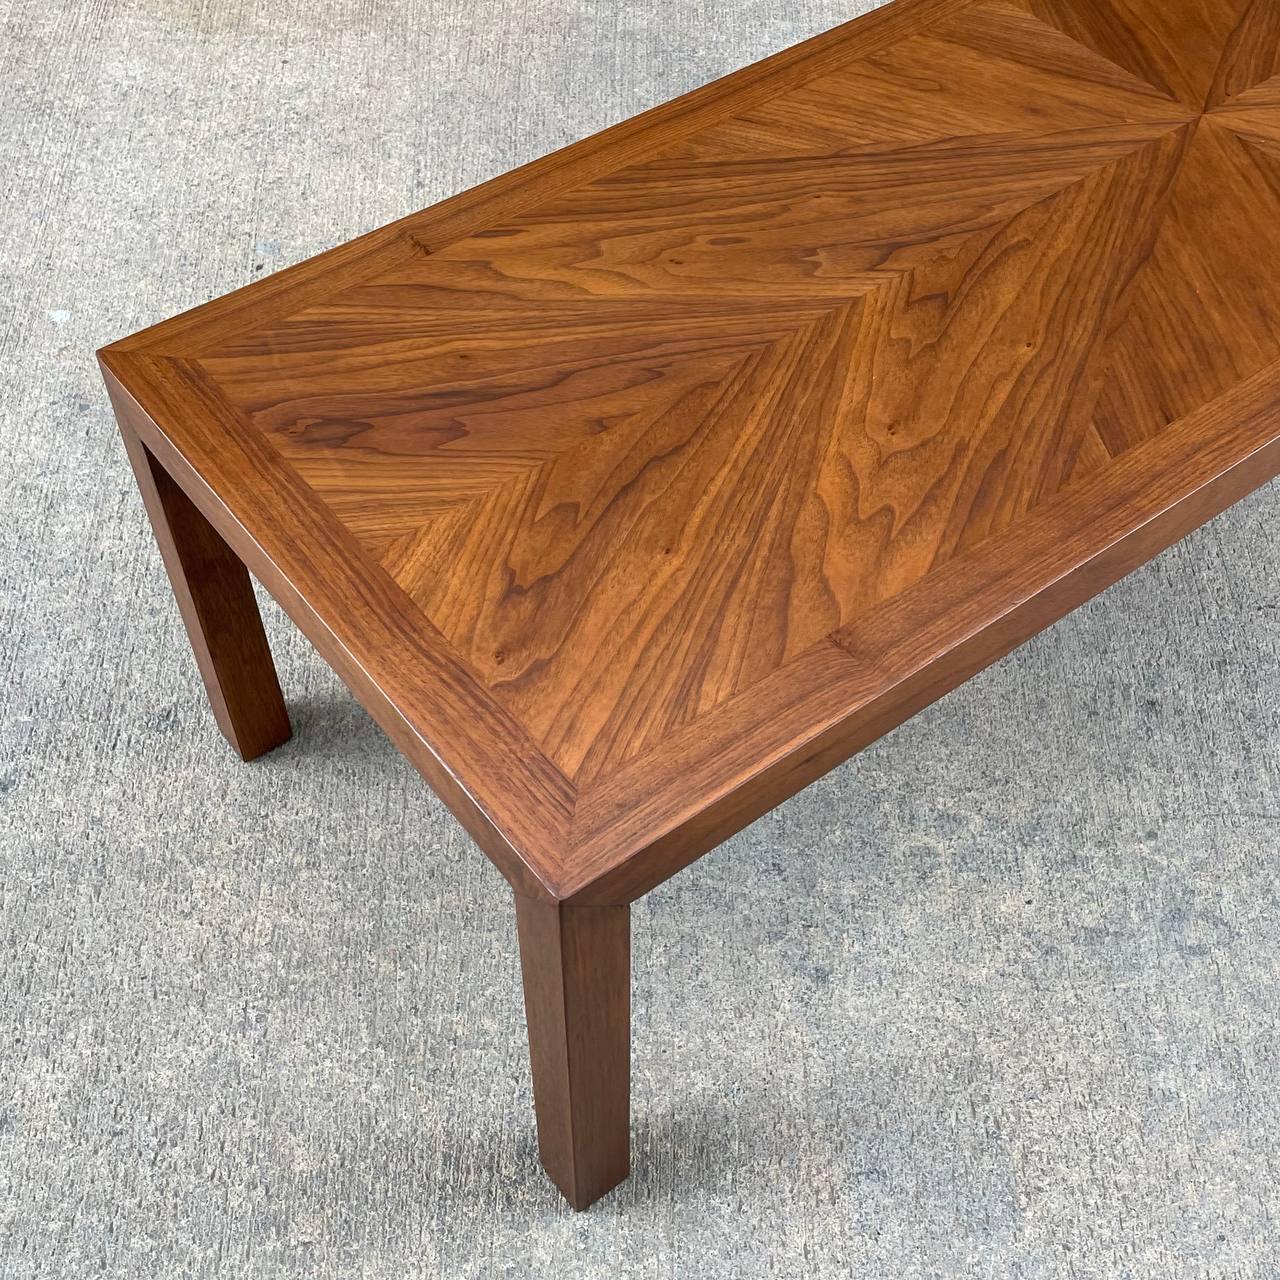 Mid-20th Century Newly Refinished - Mid-Century Modern Walnut Coffee Table by Lane For Sale